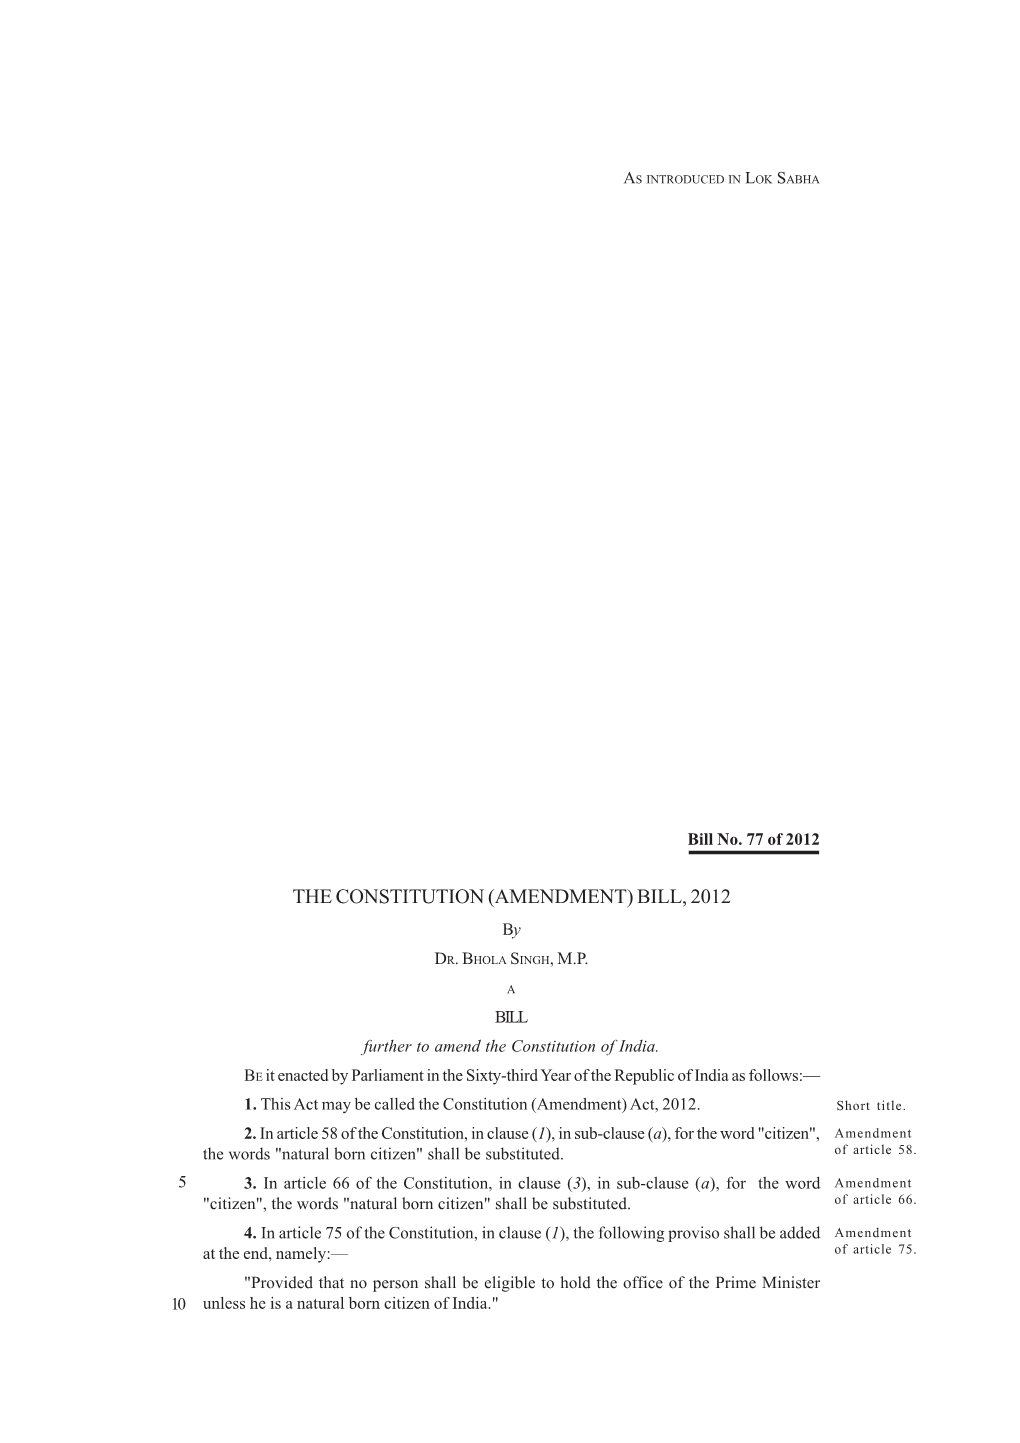 THE CONSTITUTION (AMENDMENT) BILL, 2012 By